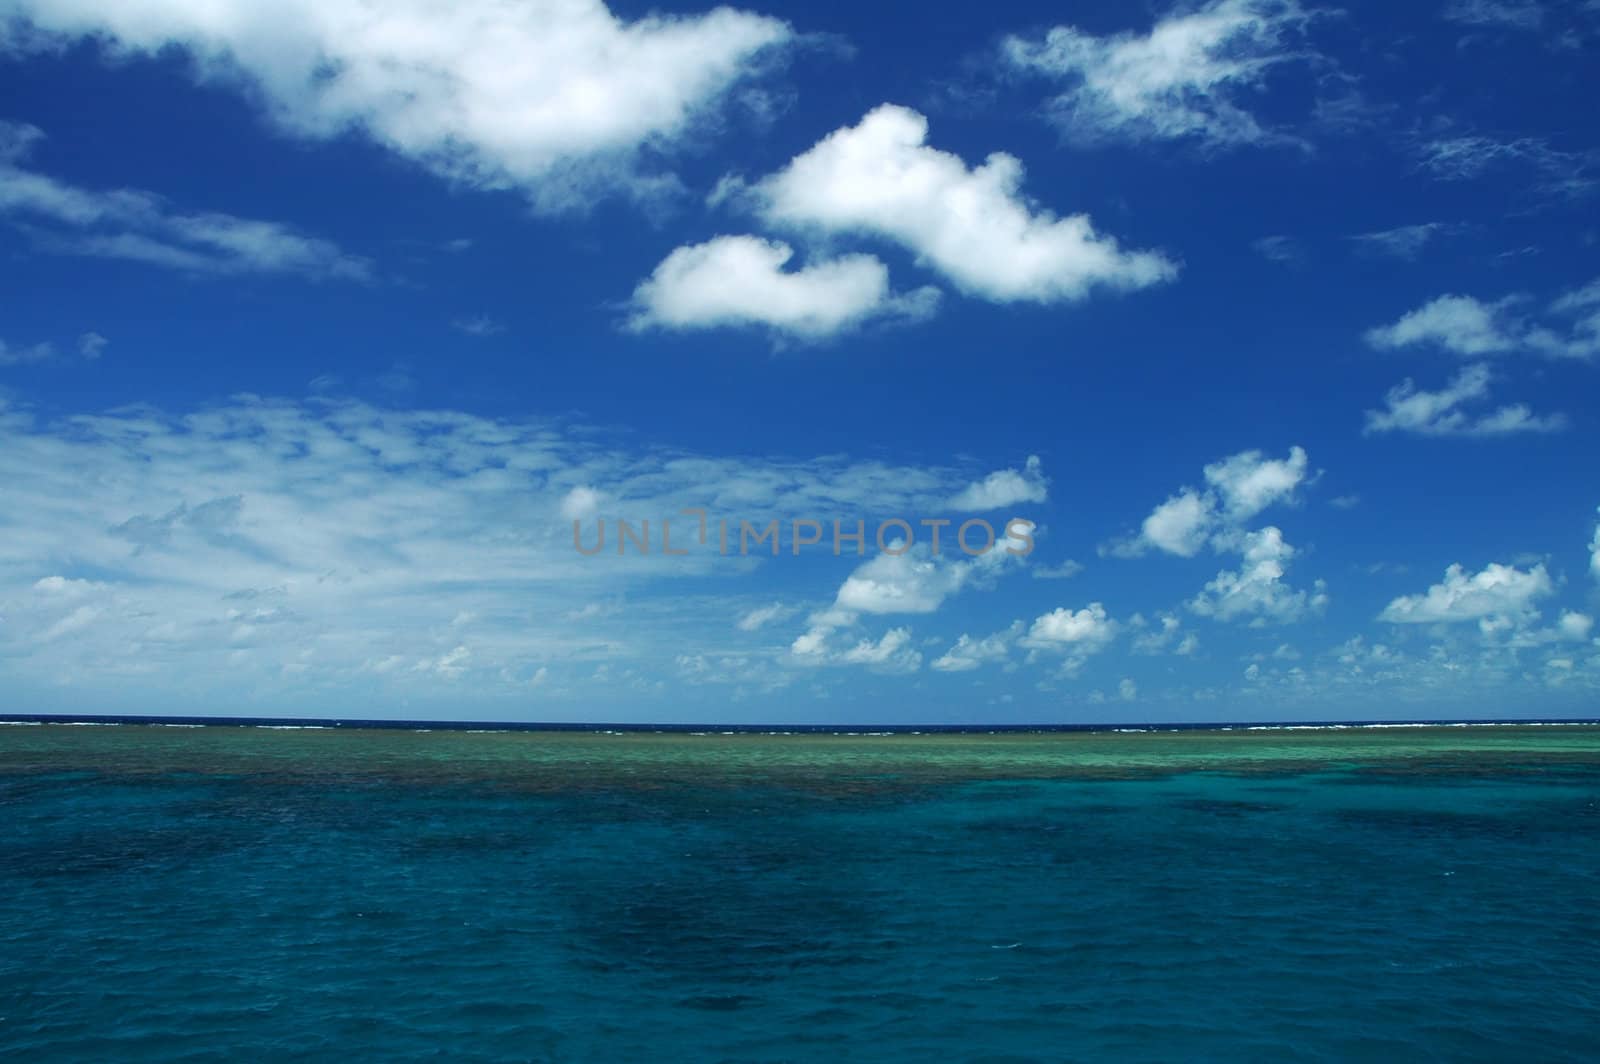 great barrier reef in australia, coral reef visible, blue cloudy sky, green water